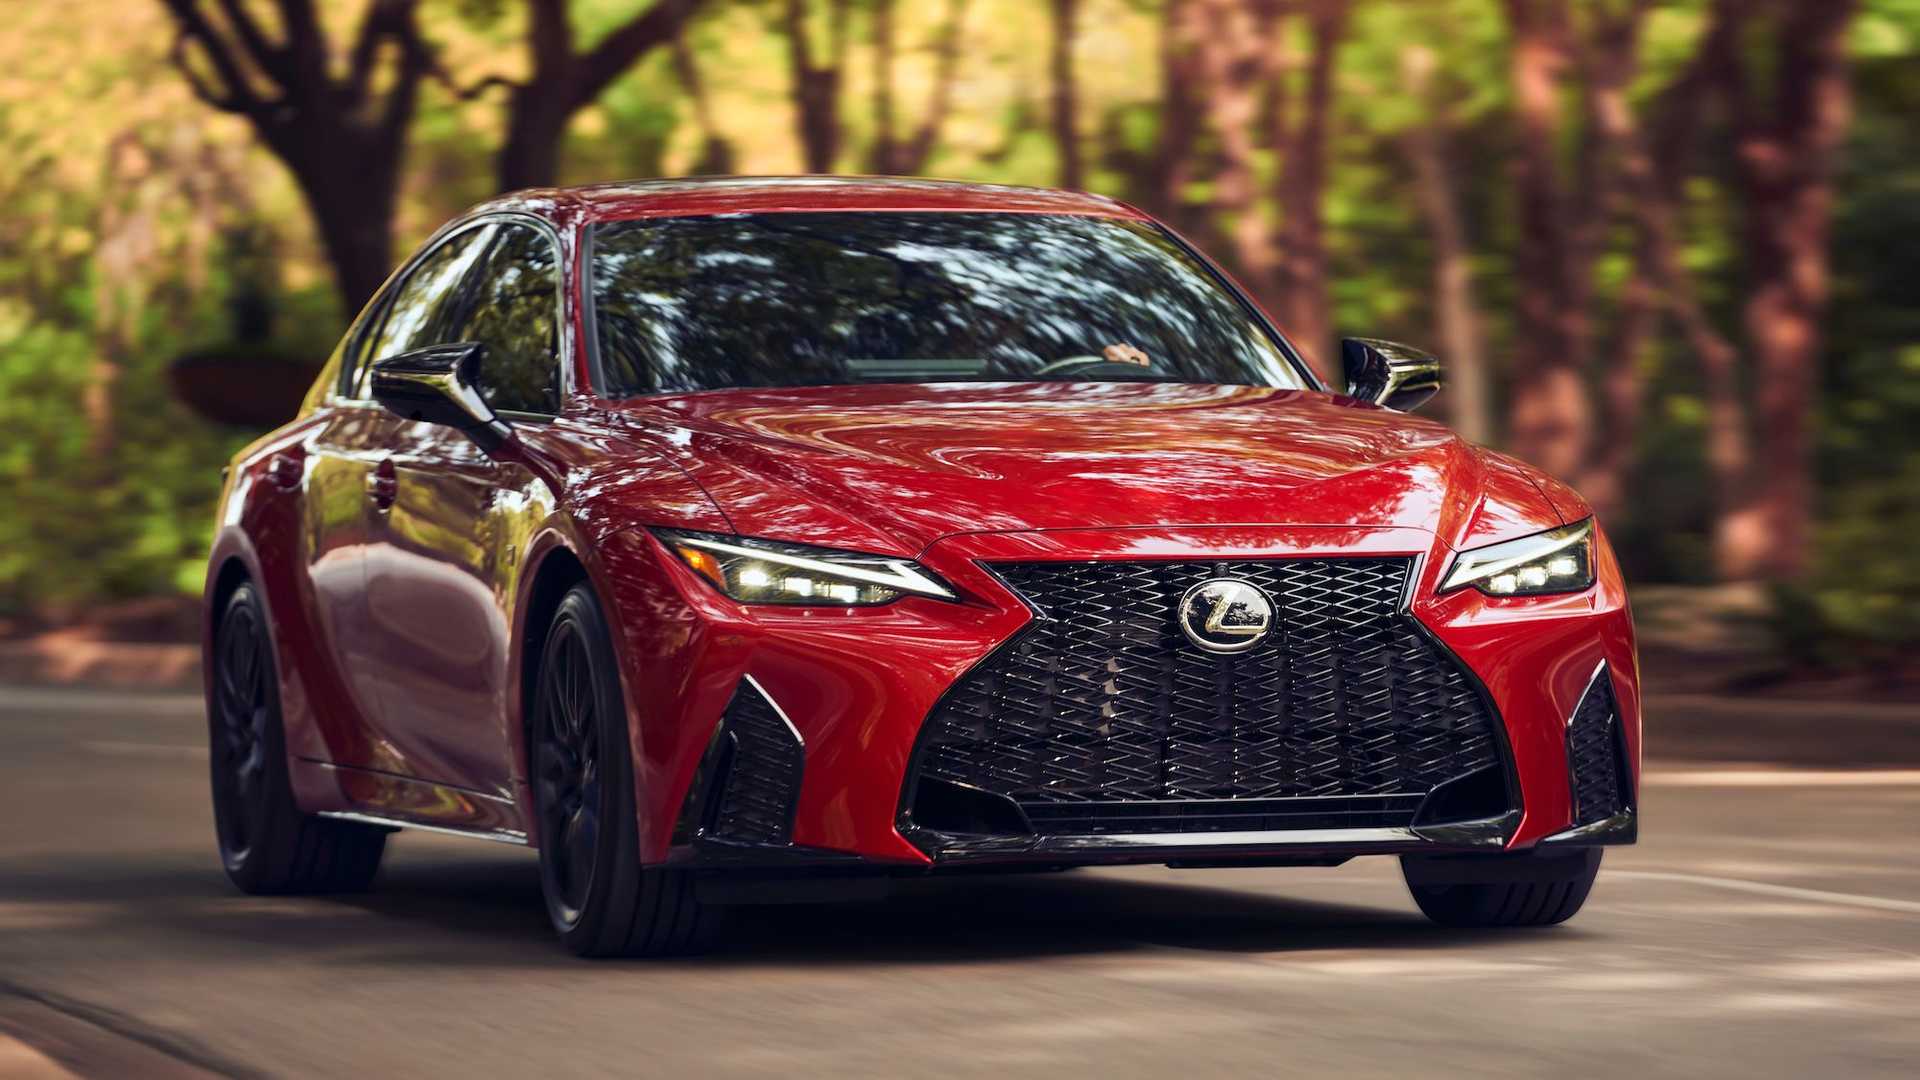 New 2021 Lexus IS Priced From $39,900 - autoevolution